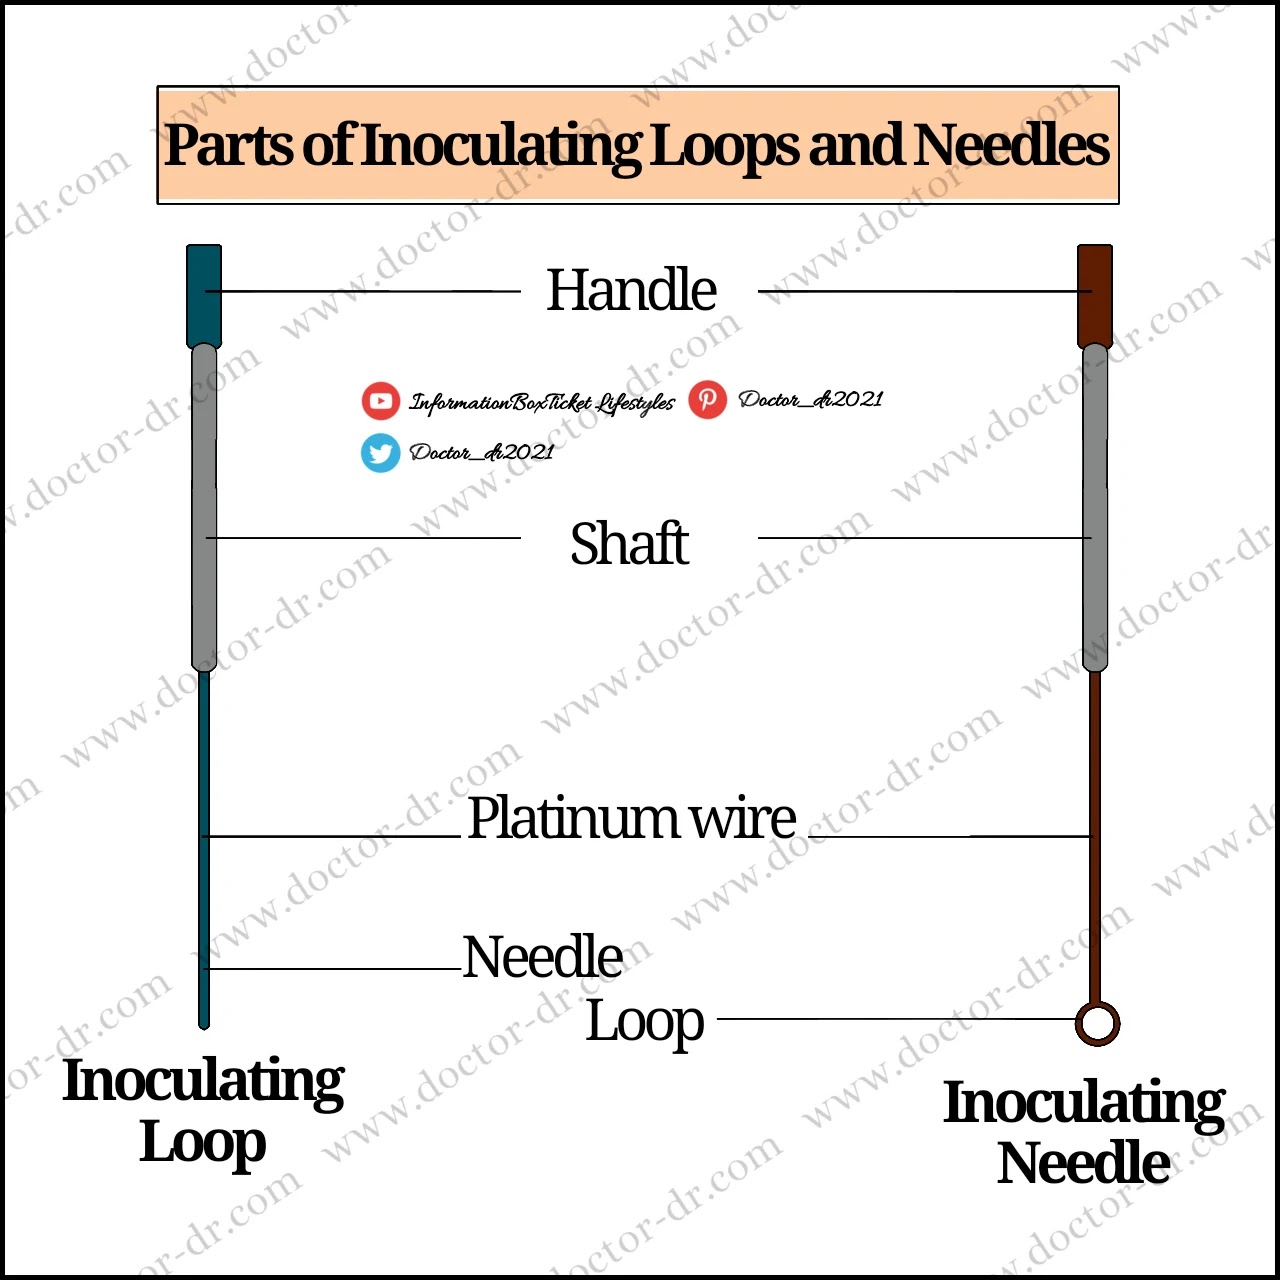 Handle: To apply the inoculating loop or needles without becoming fatigued, grasp the handle portion of the loop or needle. It comes in an insulated or non-insulated version and is made of aluminum and brass. It has an 8-inch grip. Shaft: The loop shaft is made of nickel-plated steel. PVC is used to insulate the shaft of the loop handle, providing the user with additional thermal protection. Turret: It can contain platinum or nickel-chromium wire. Loop: The extremity of the platinum or nichrome wire attached to the turret is twisted to form a loop structure. The metal is oxidation and high temperature resistant. The loop has a diameter between 2 and 5 millimeters. Needle: It is essentially the same as the loop but makes use of a single wire.